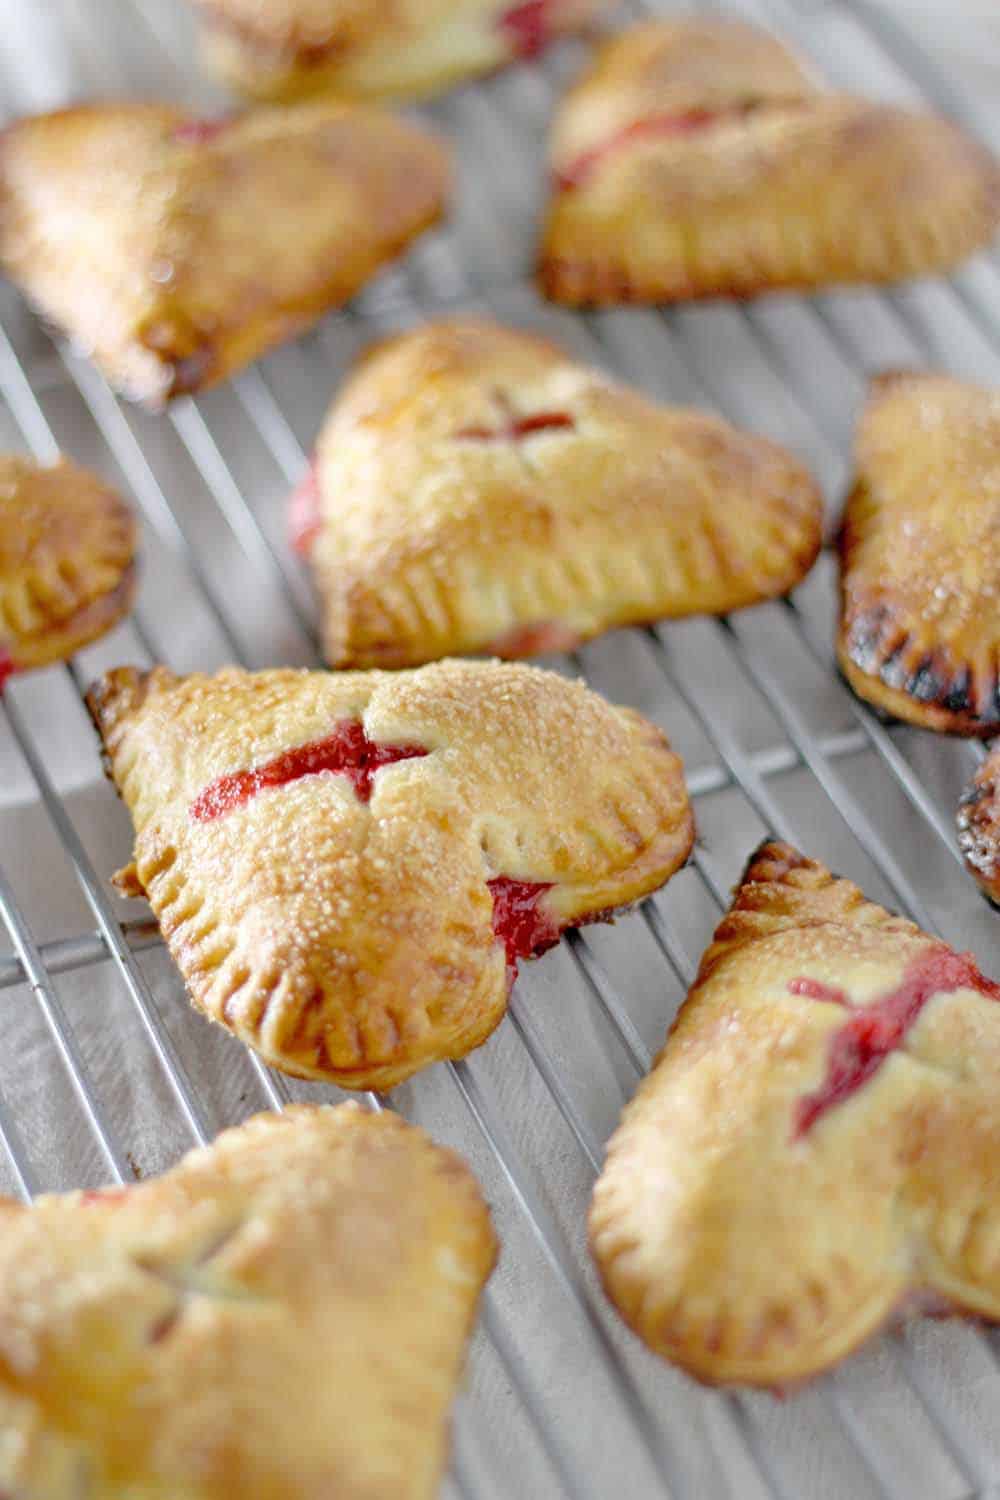 Strawberry ginger hand pies